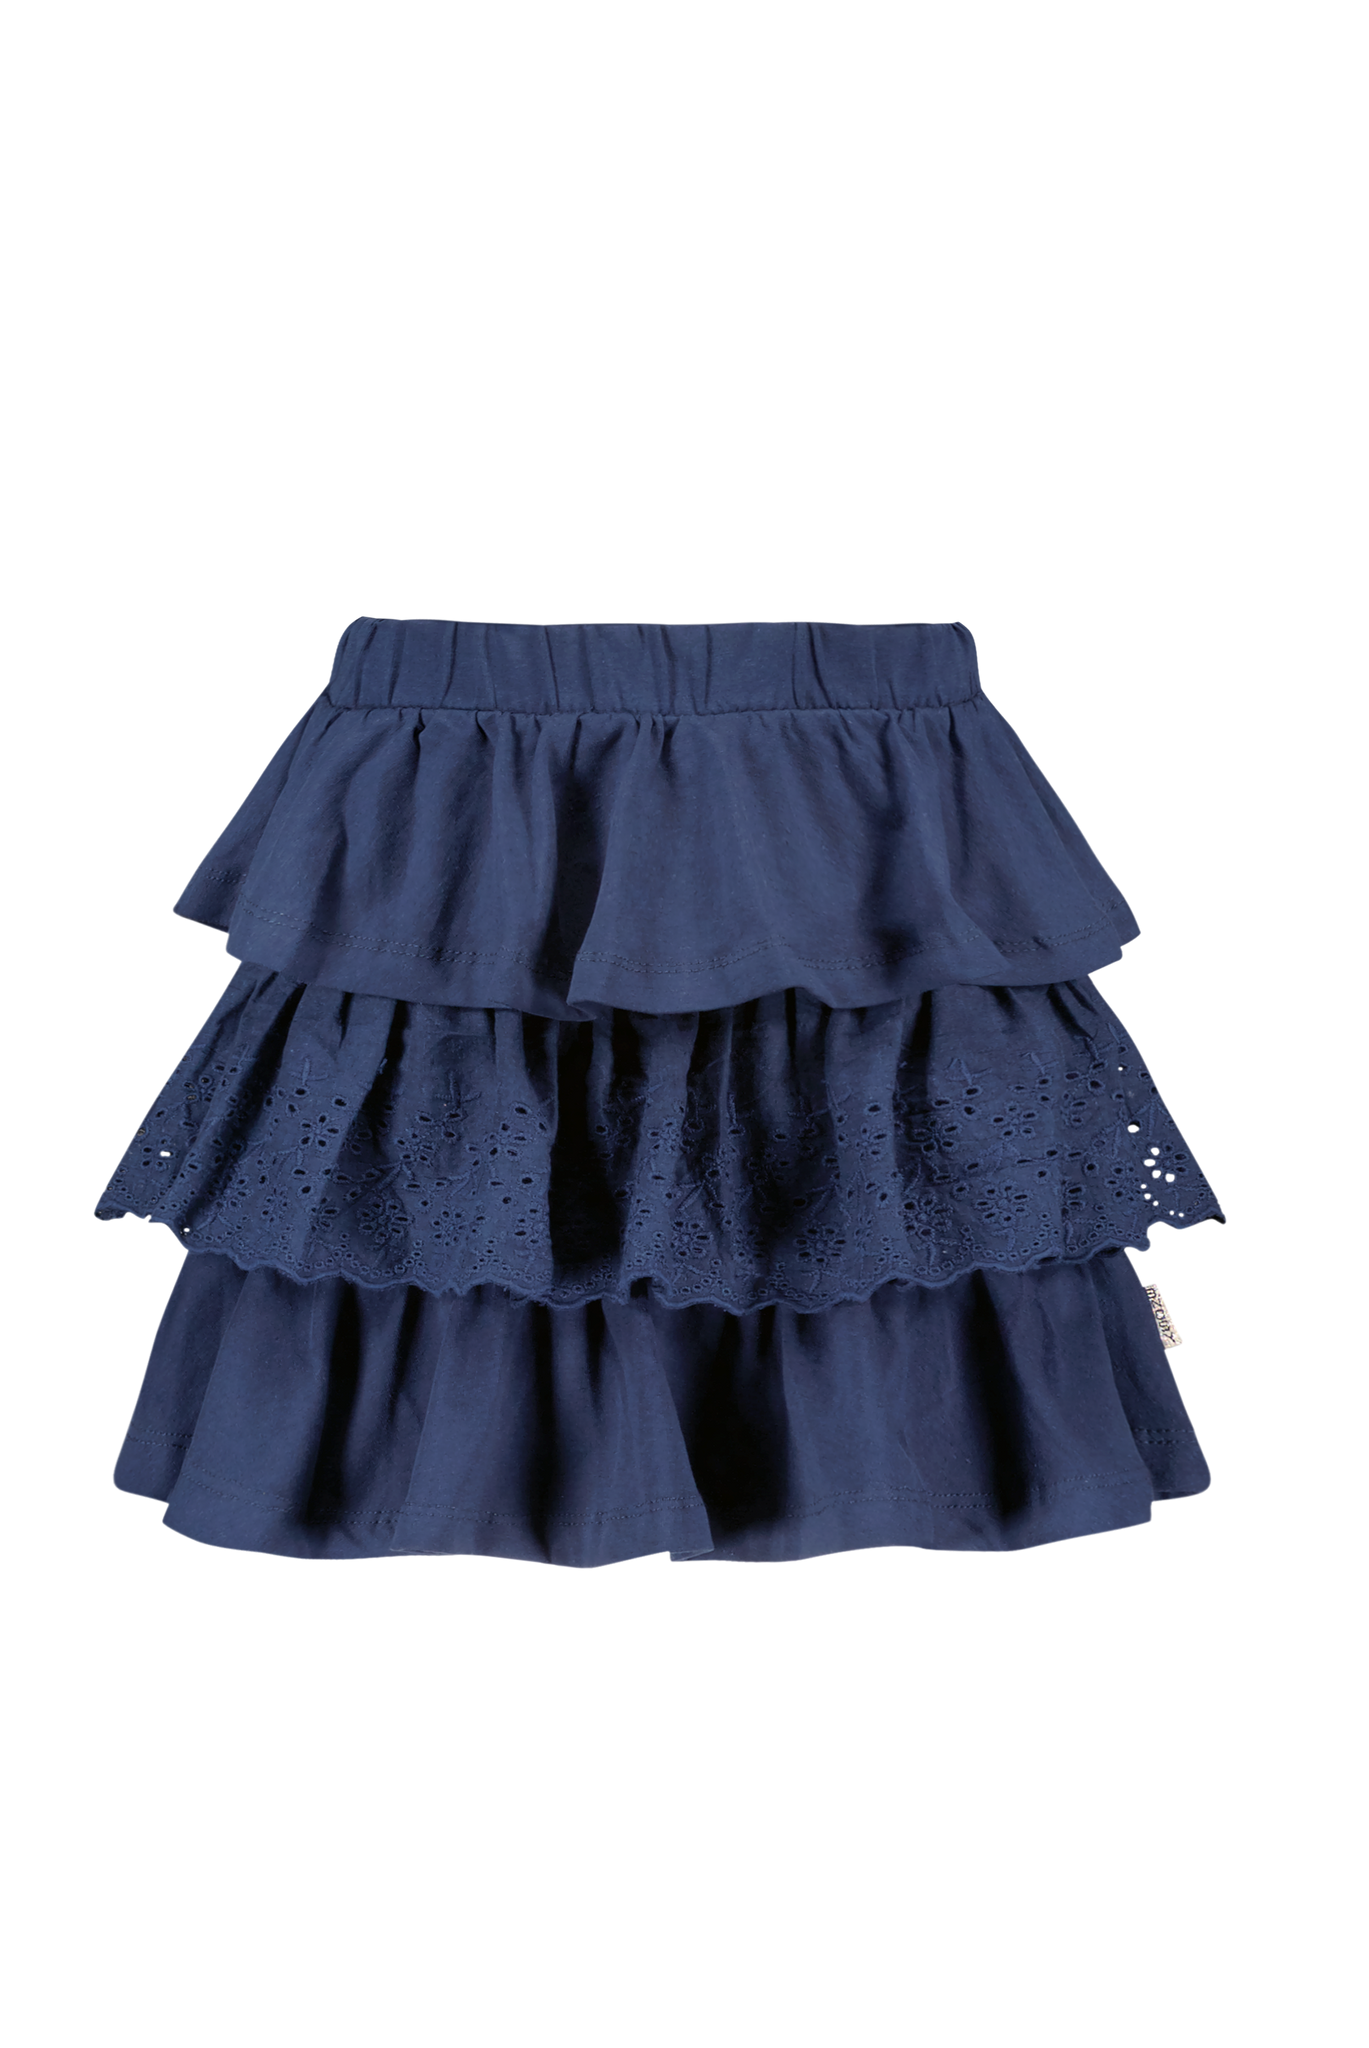 Girls 3 layer skirt. w/ 2nd layer embroidery lace fabric